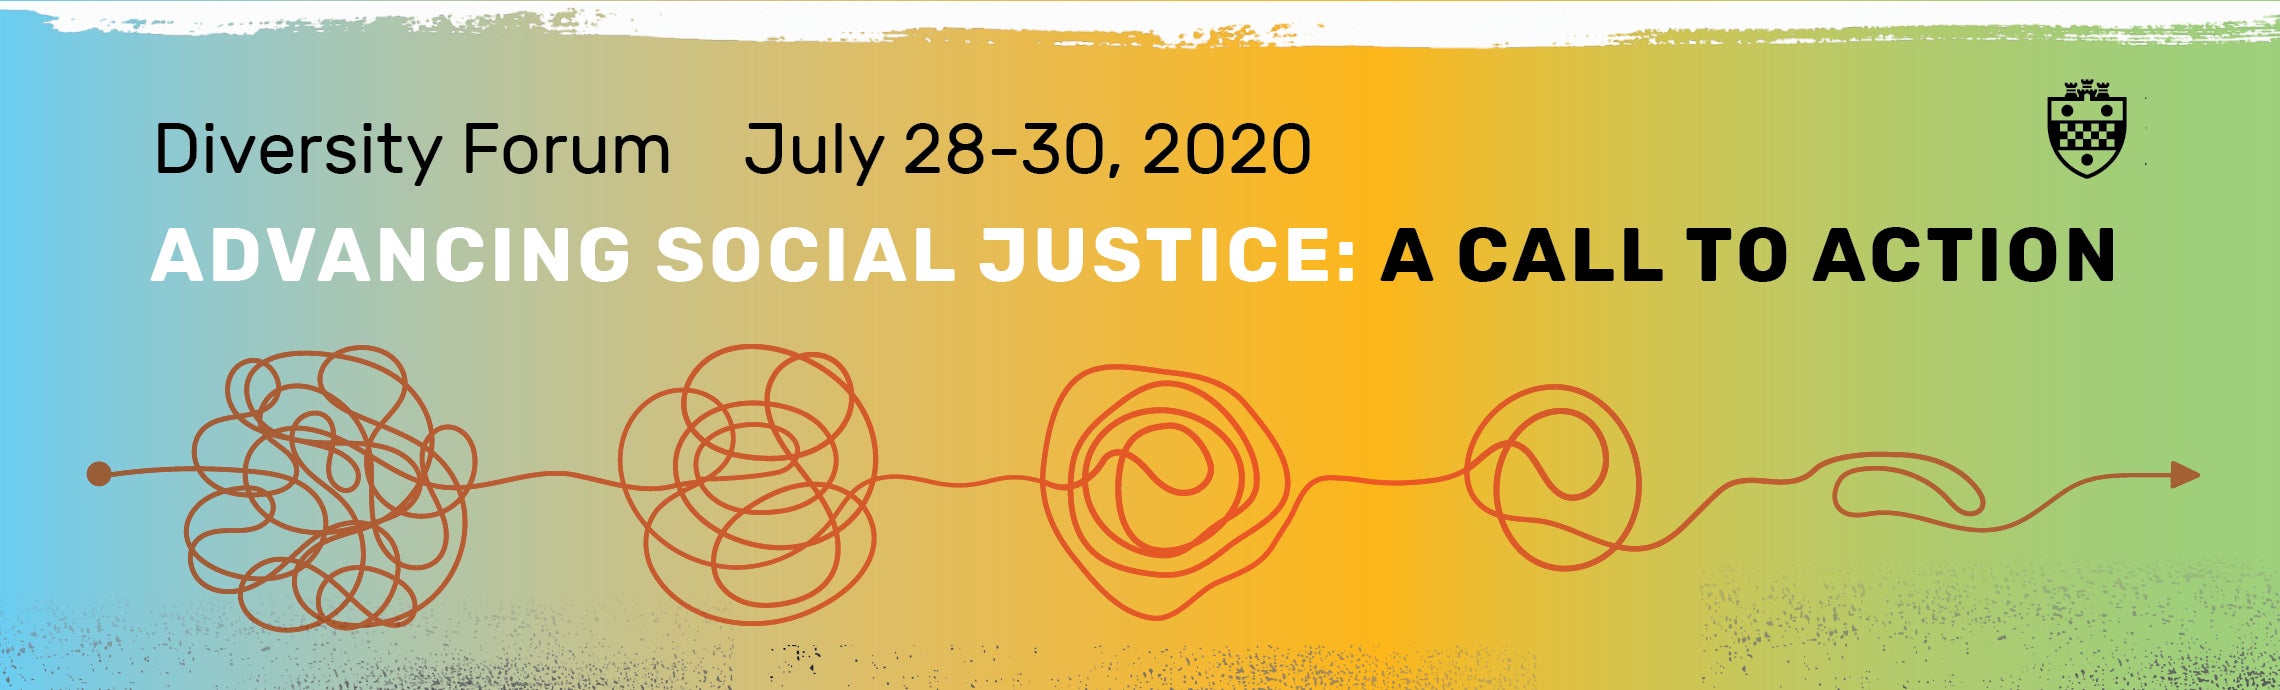 Advancing Social Justice: A Call to Action